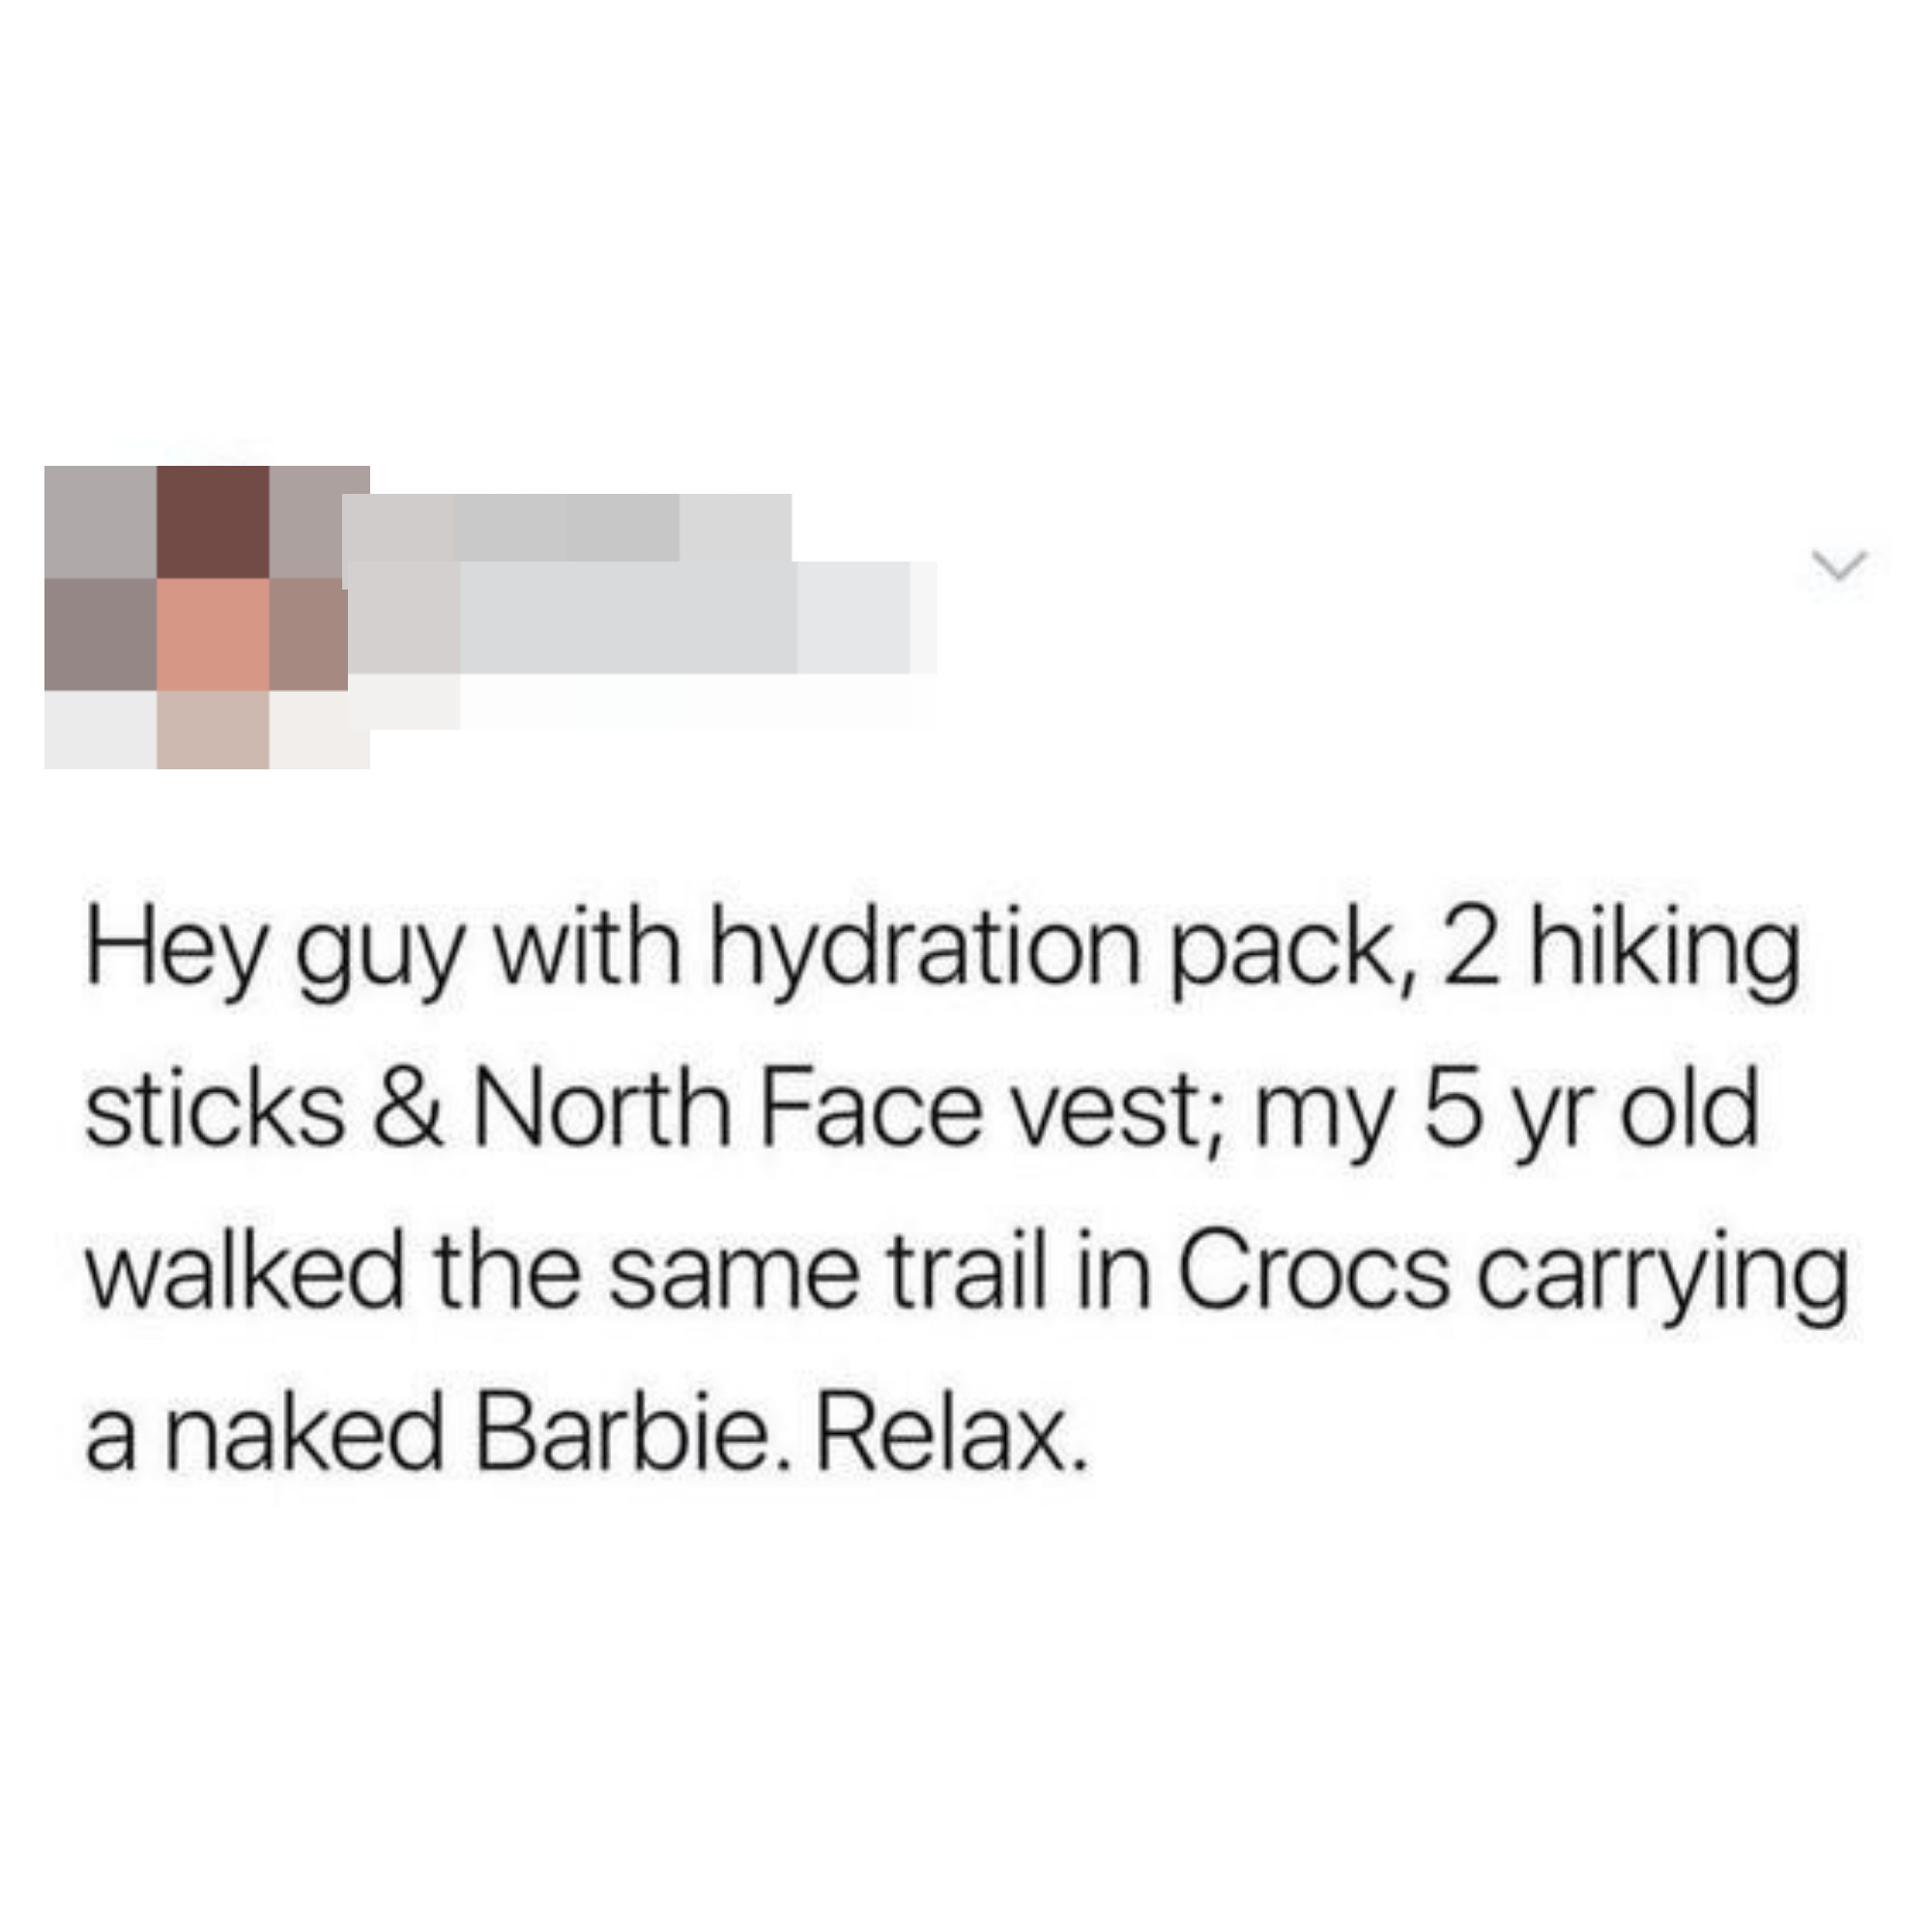 &quot;my 5 yr old walked the same trail in Crocs carrying a naked Barbie.&quot;